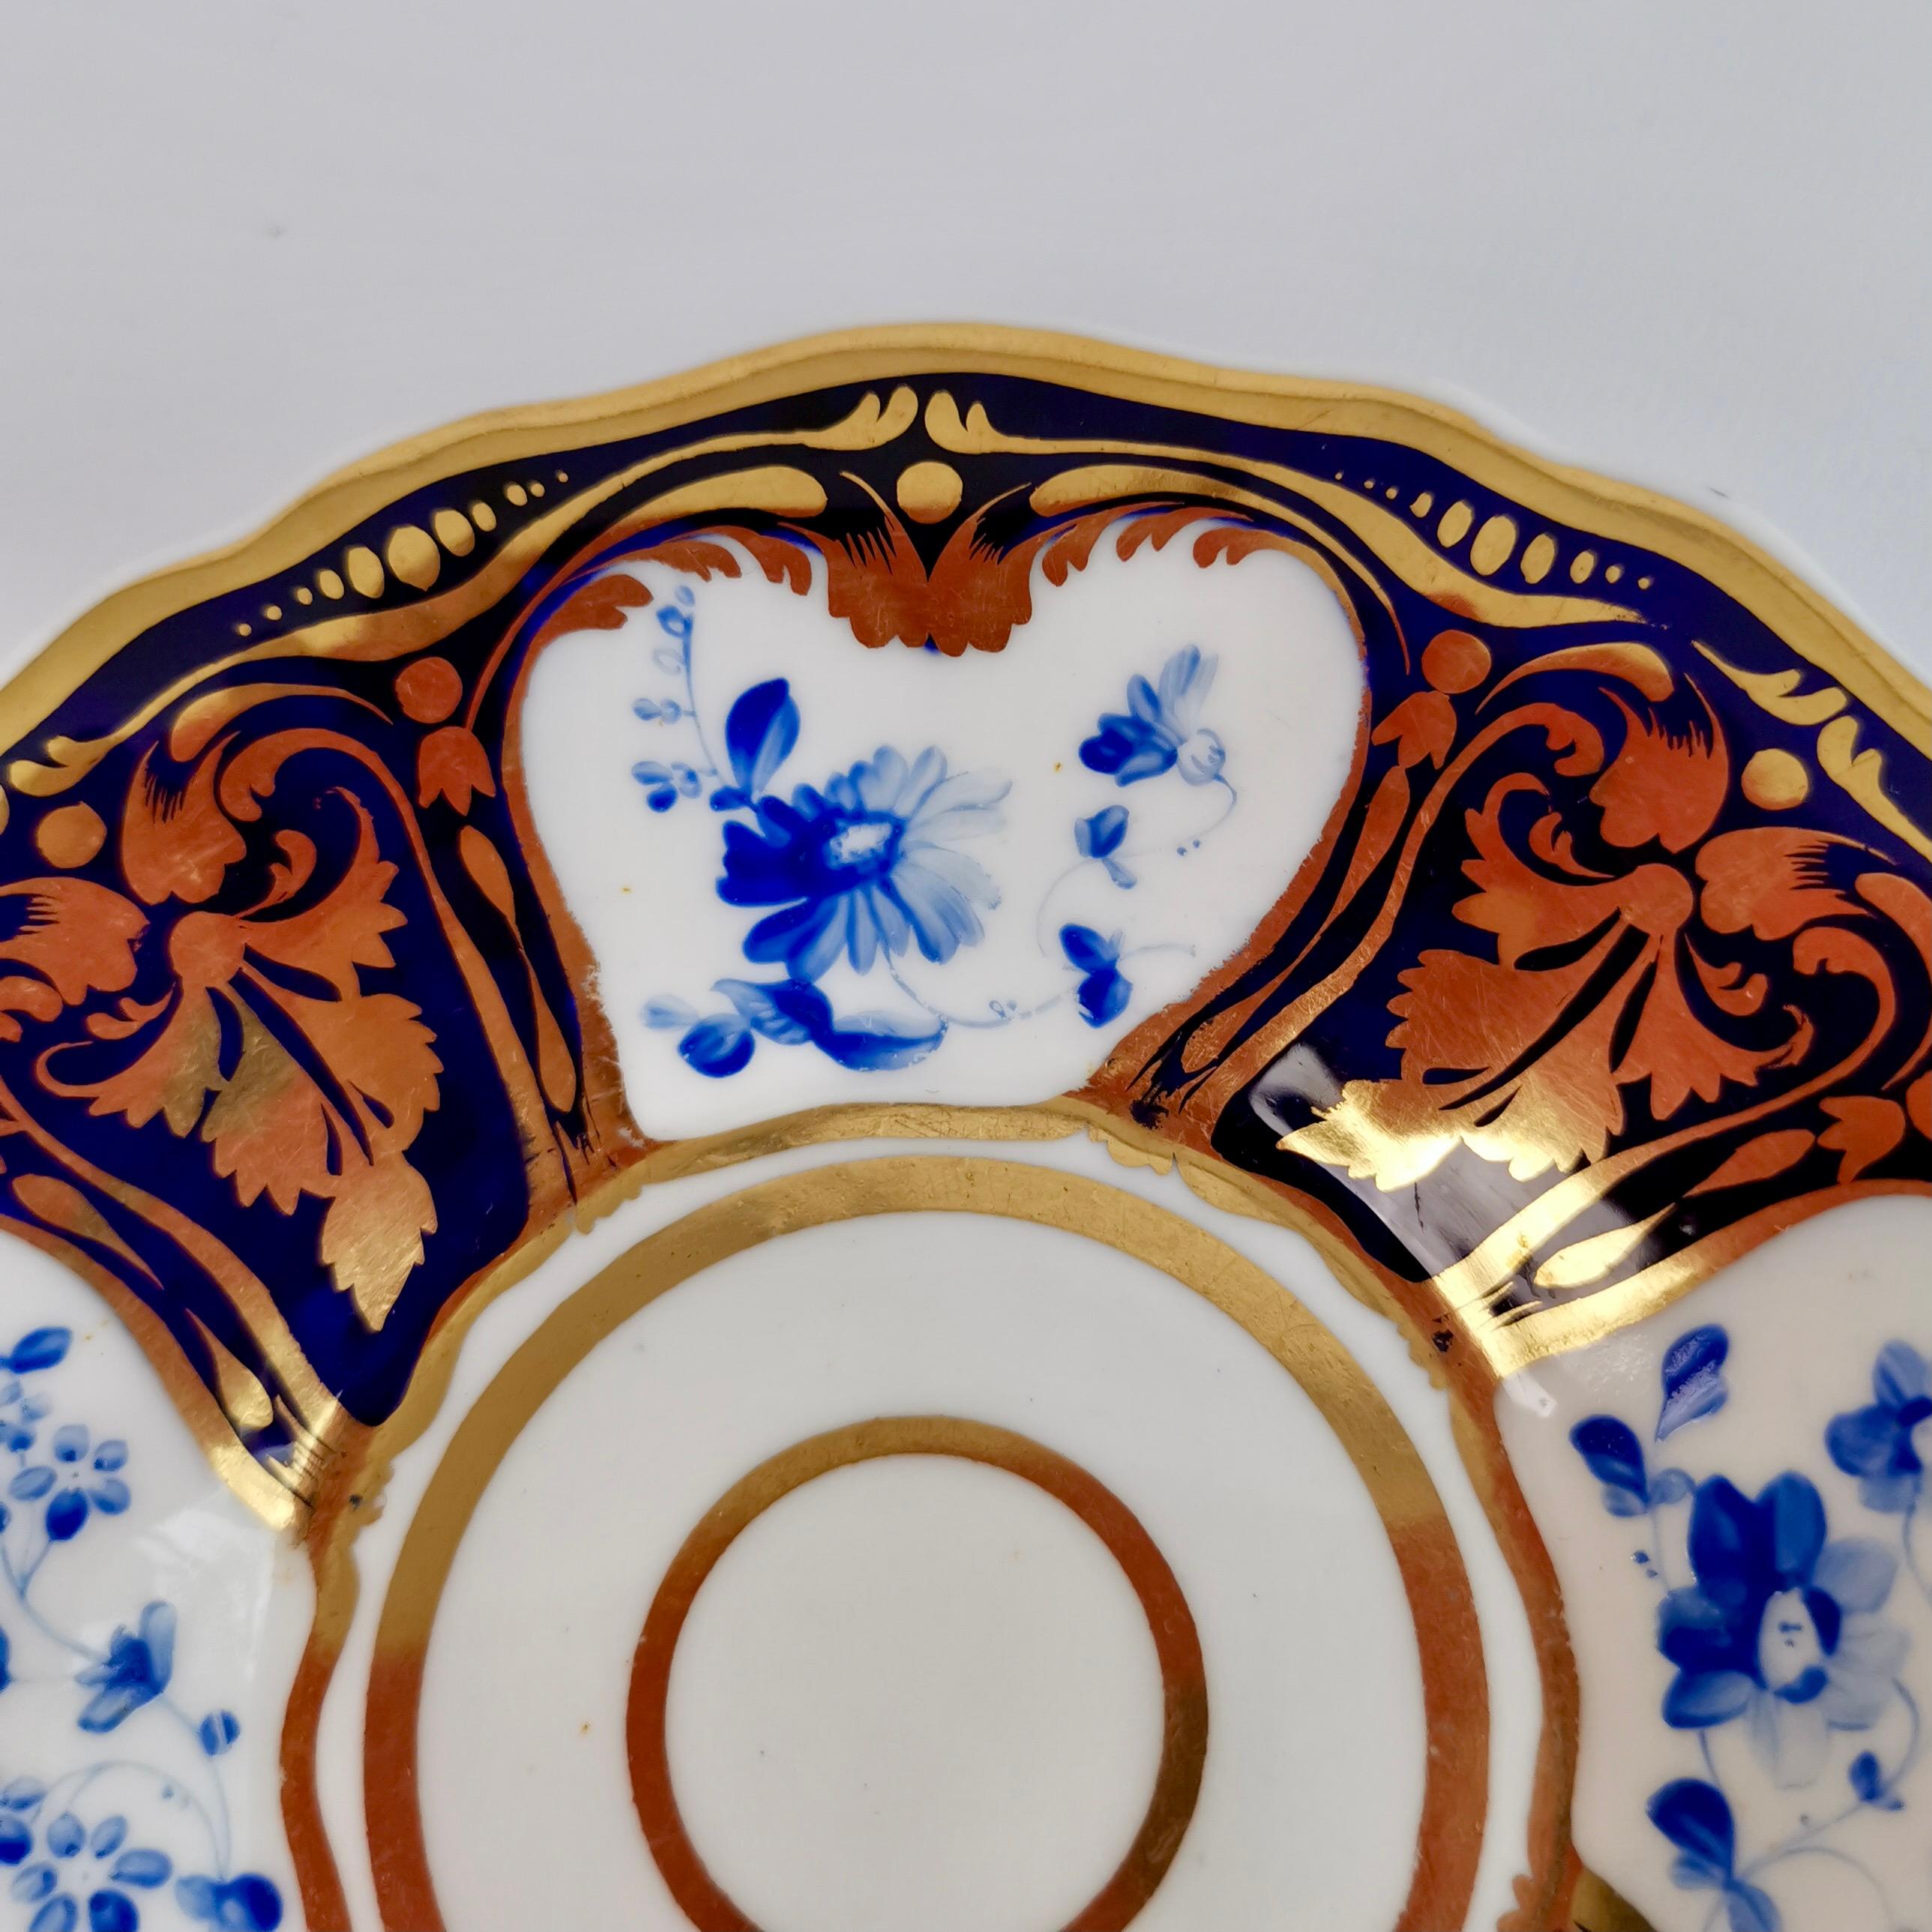 Ridgway Porcelain Teacup and Saucer, Blue Flowers and Gilt, Regency, Ca 1825 In Good Condition For Sale In London, GB